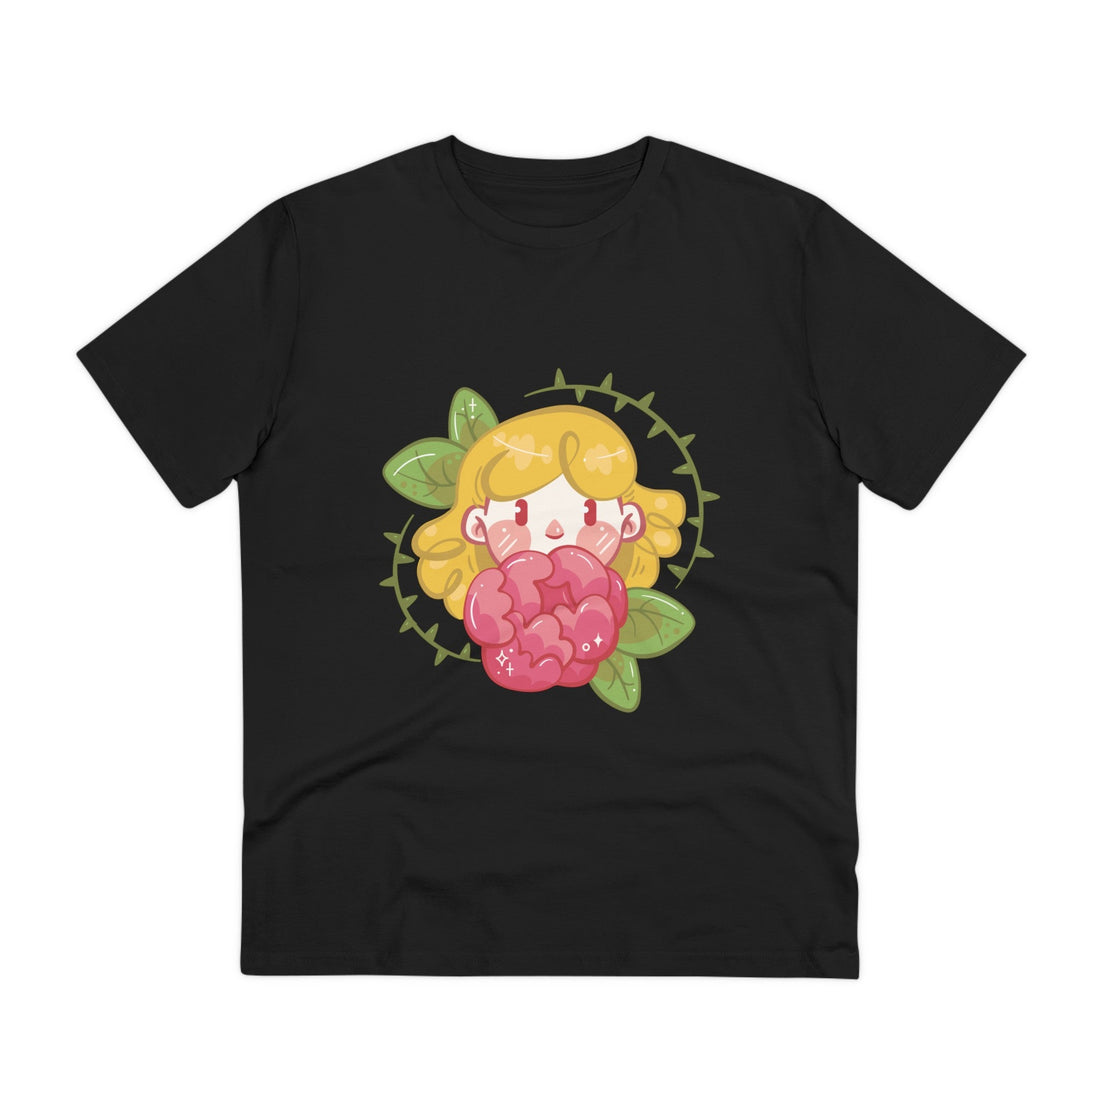 Printify T-Shirt Black / 2XS Girl with Flower - Floral Children - Front Design